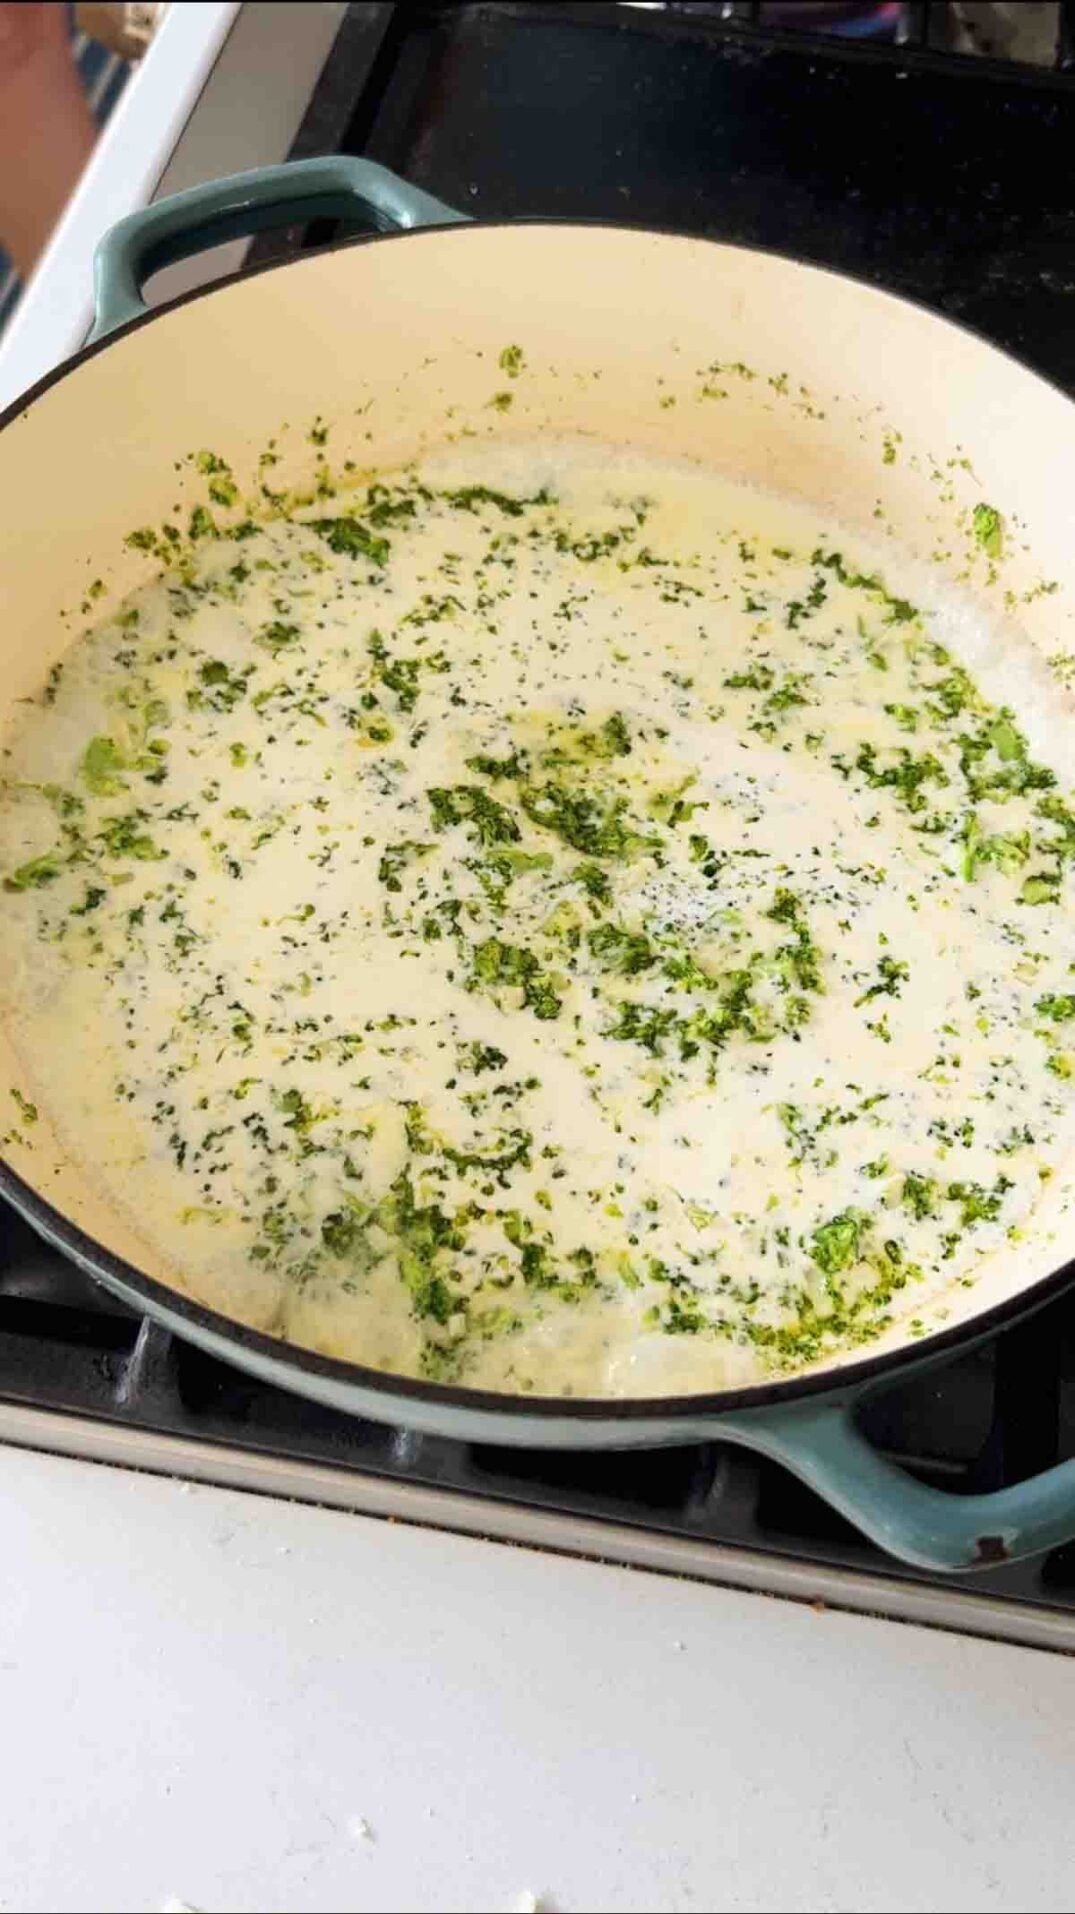 lemon cream sauce with broccoli in a blue braising dish on a stovetop.